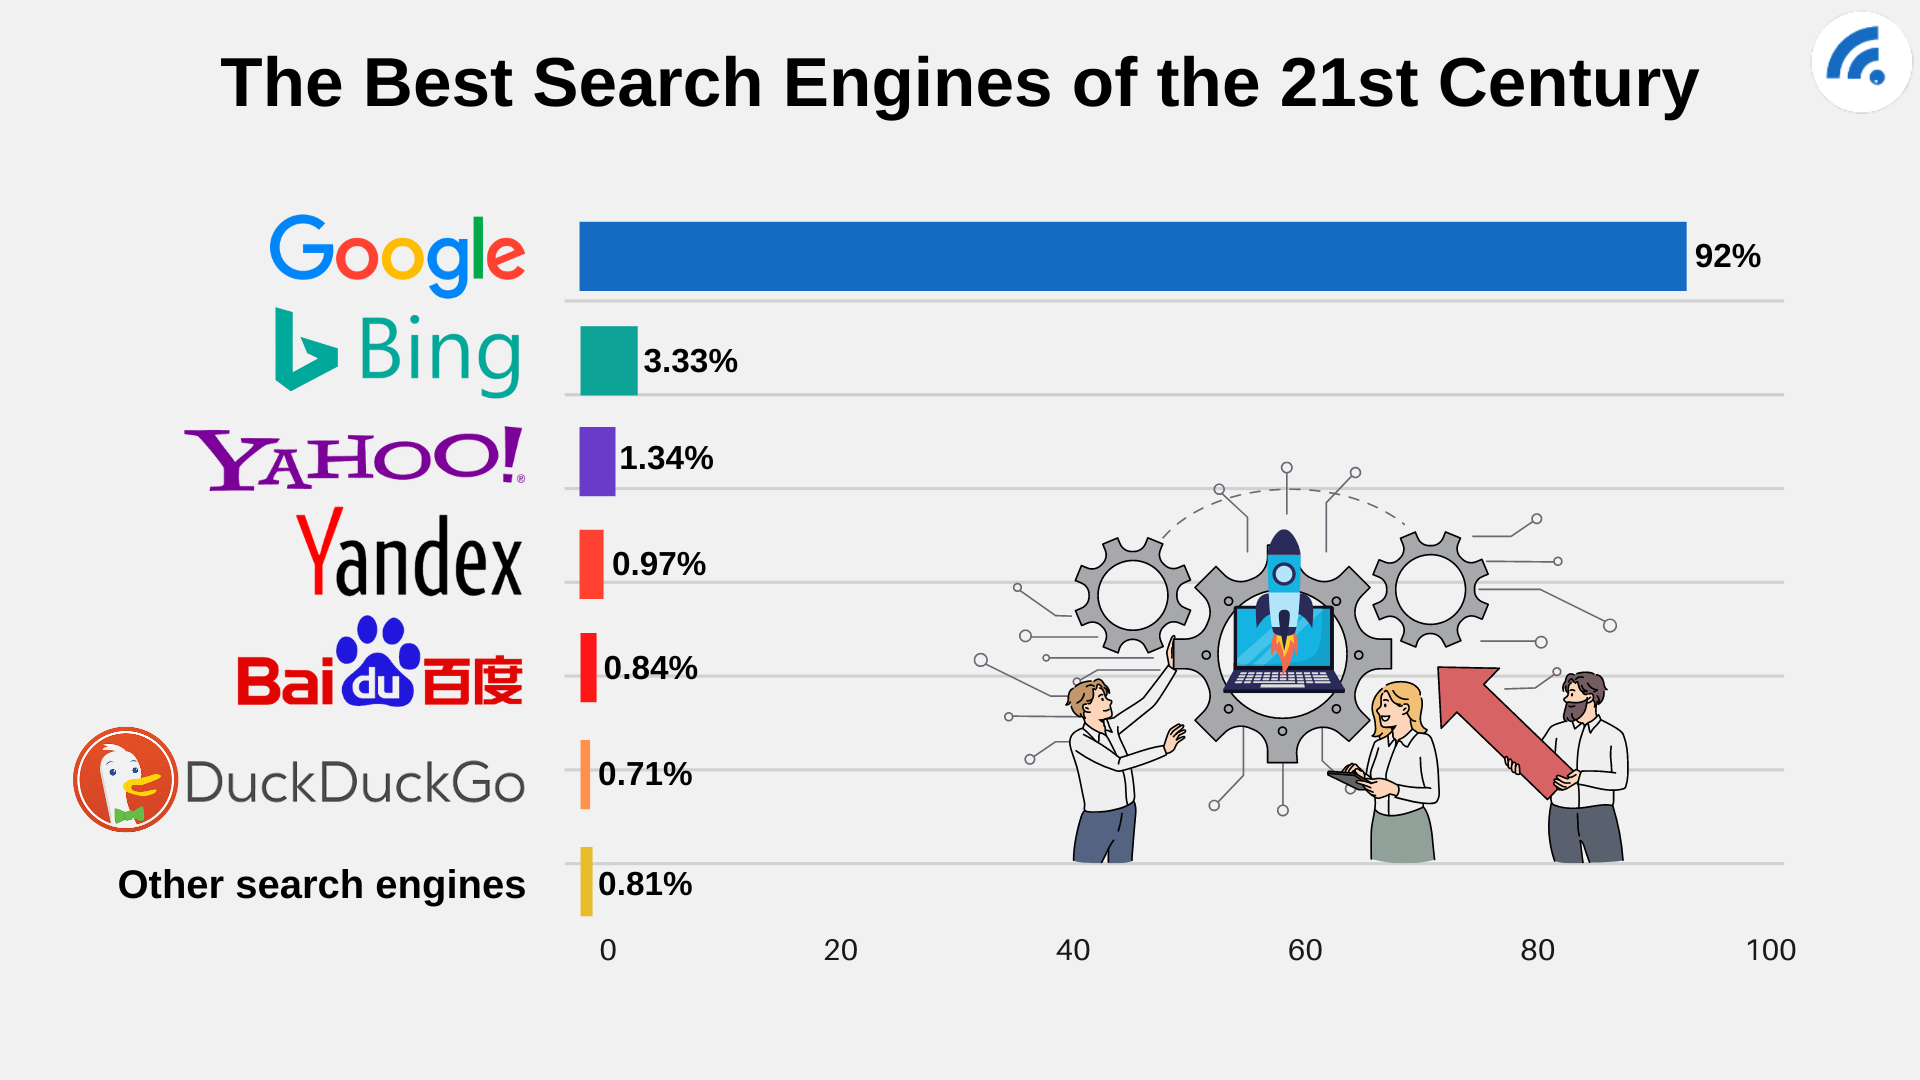 Is Google the world's largest search engine?